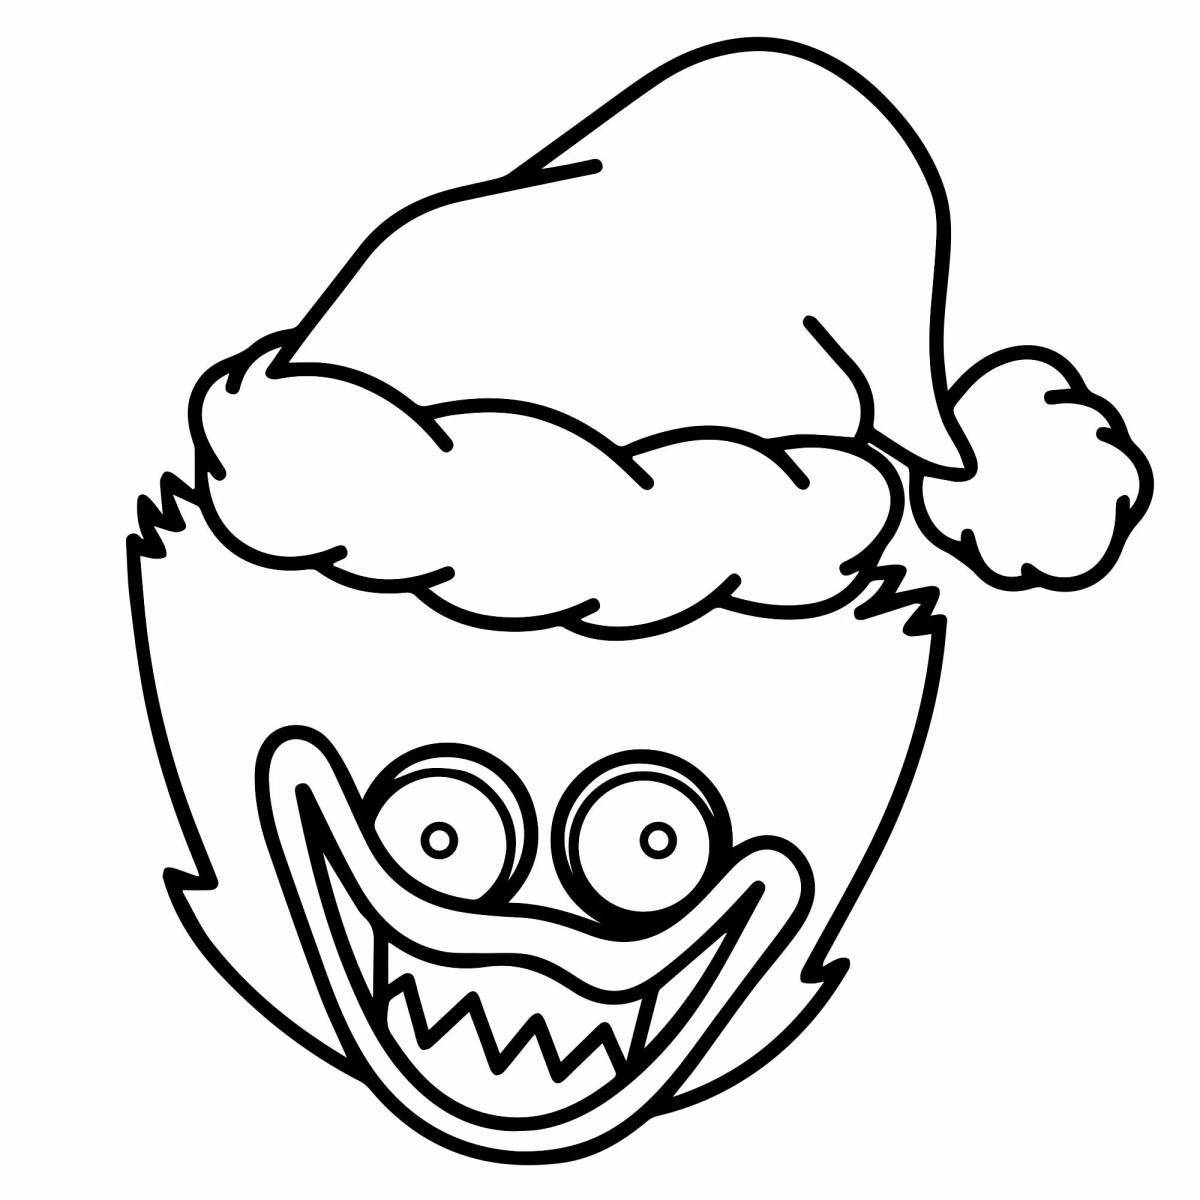 Huggies waggie awesome coloring page